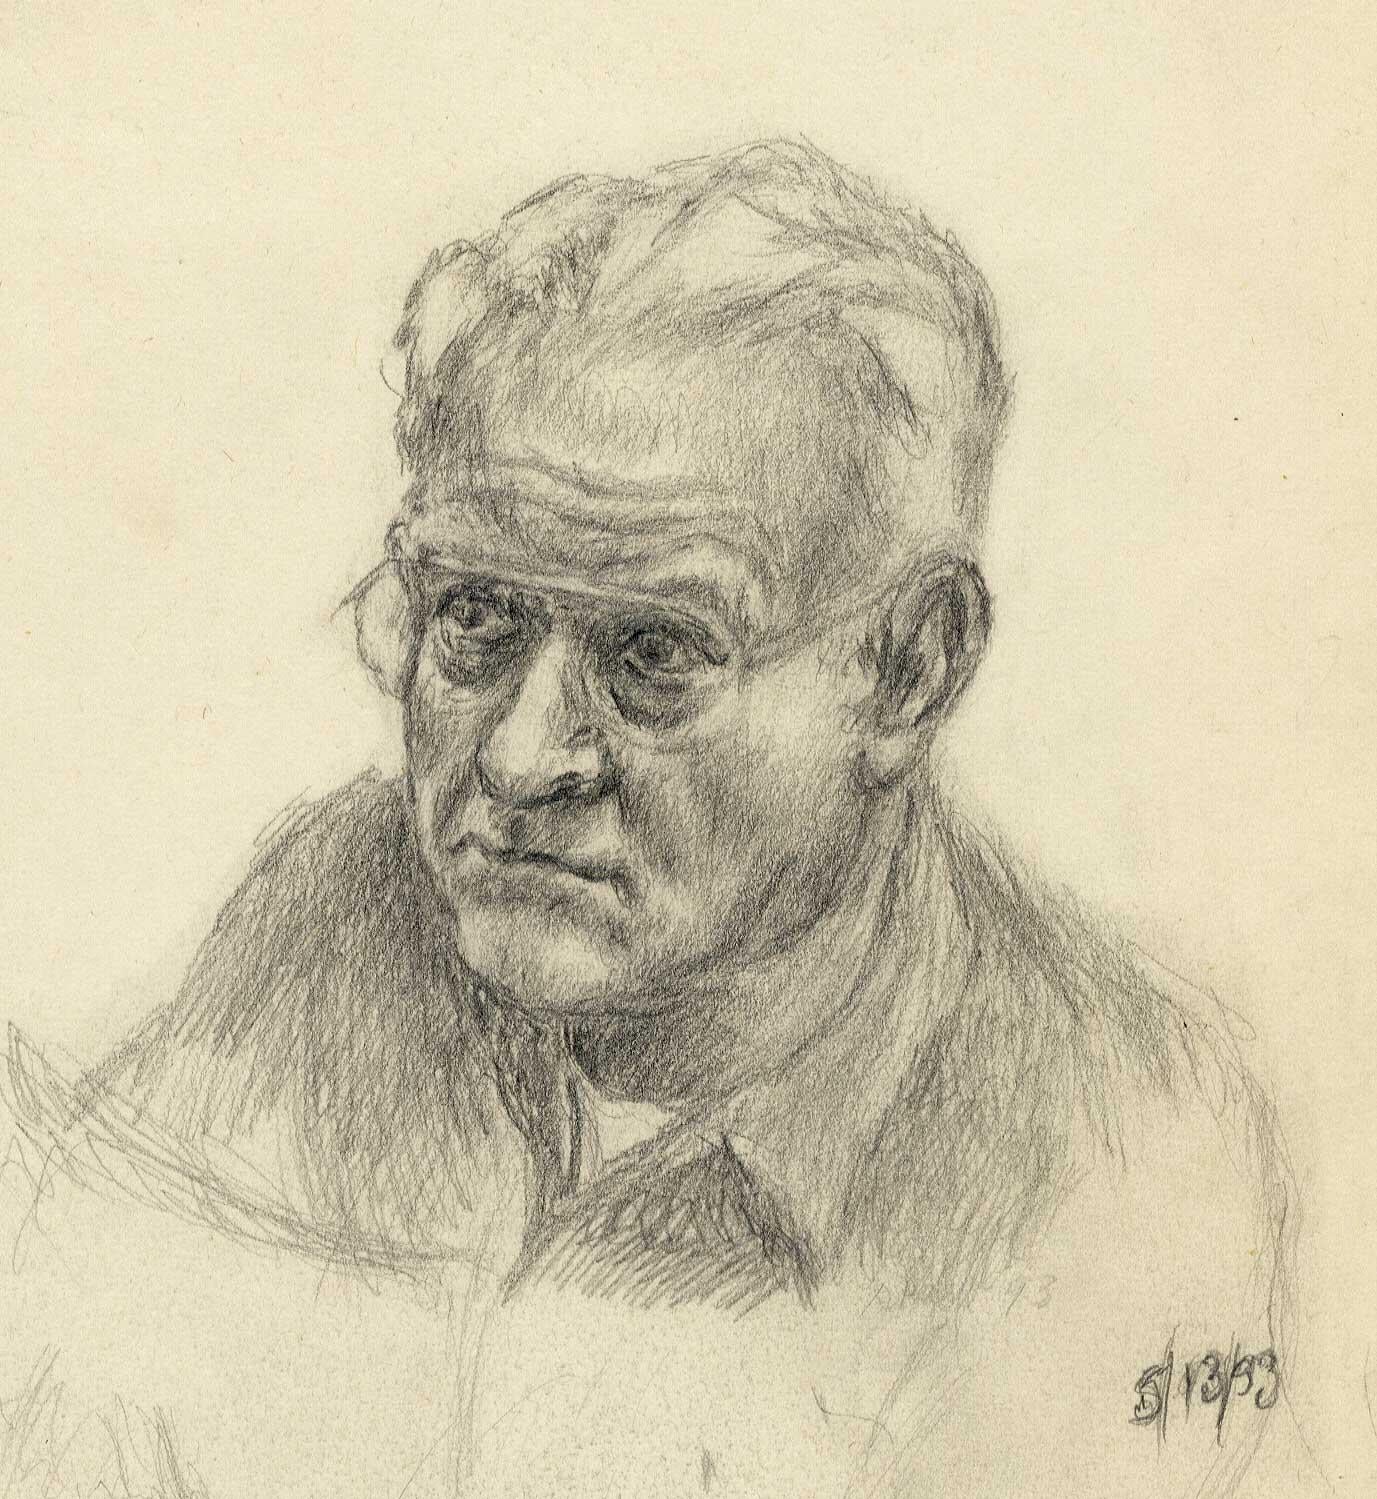 This pencil sketch of the artist was created in last decade of Jack Nesbitt's life.  Nesbitt was always drawing and sketching. He filled books with sketches of characters and objects he'd seen on the off chance that he might use them one day.  We